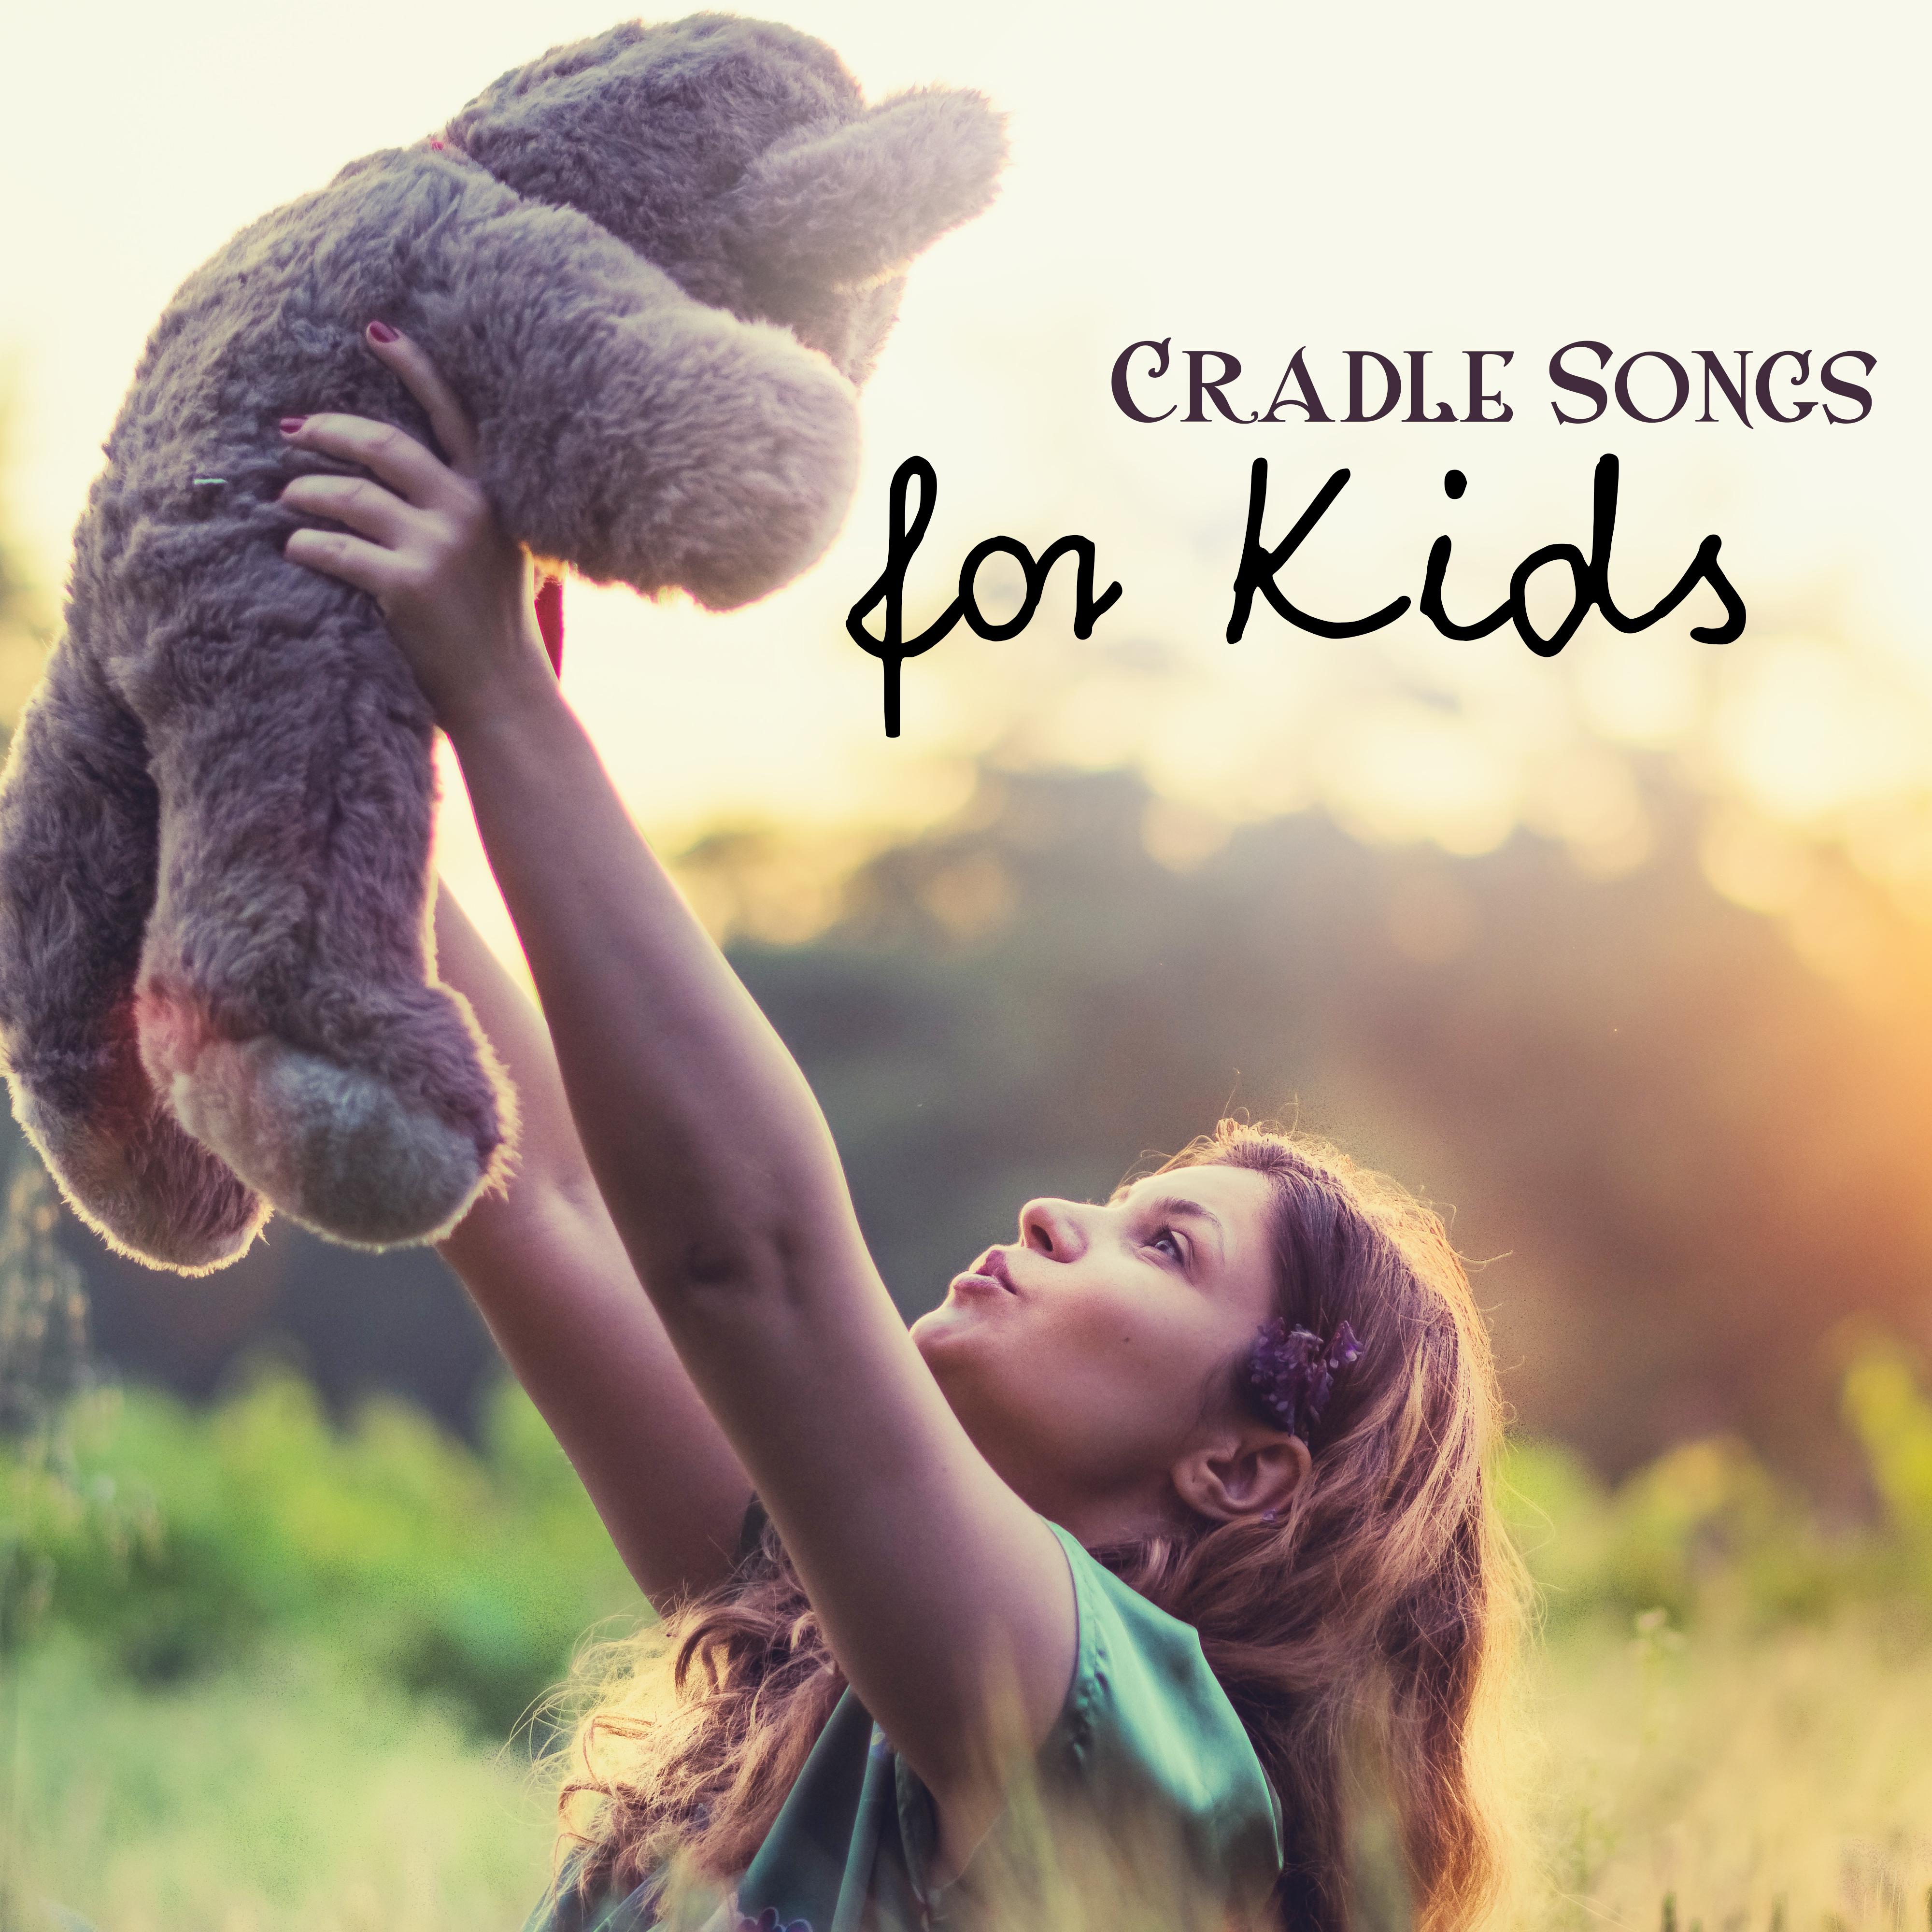 Cradle Songs for Kids – Bedtime, Soft Lullabies, Soothing Melodies for Sleep, Baby Music, Evening Lullaby